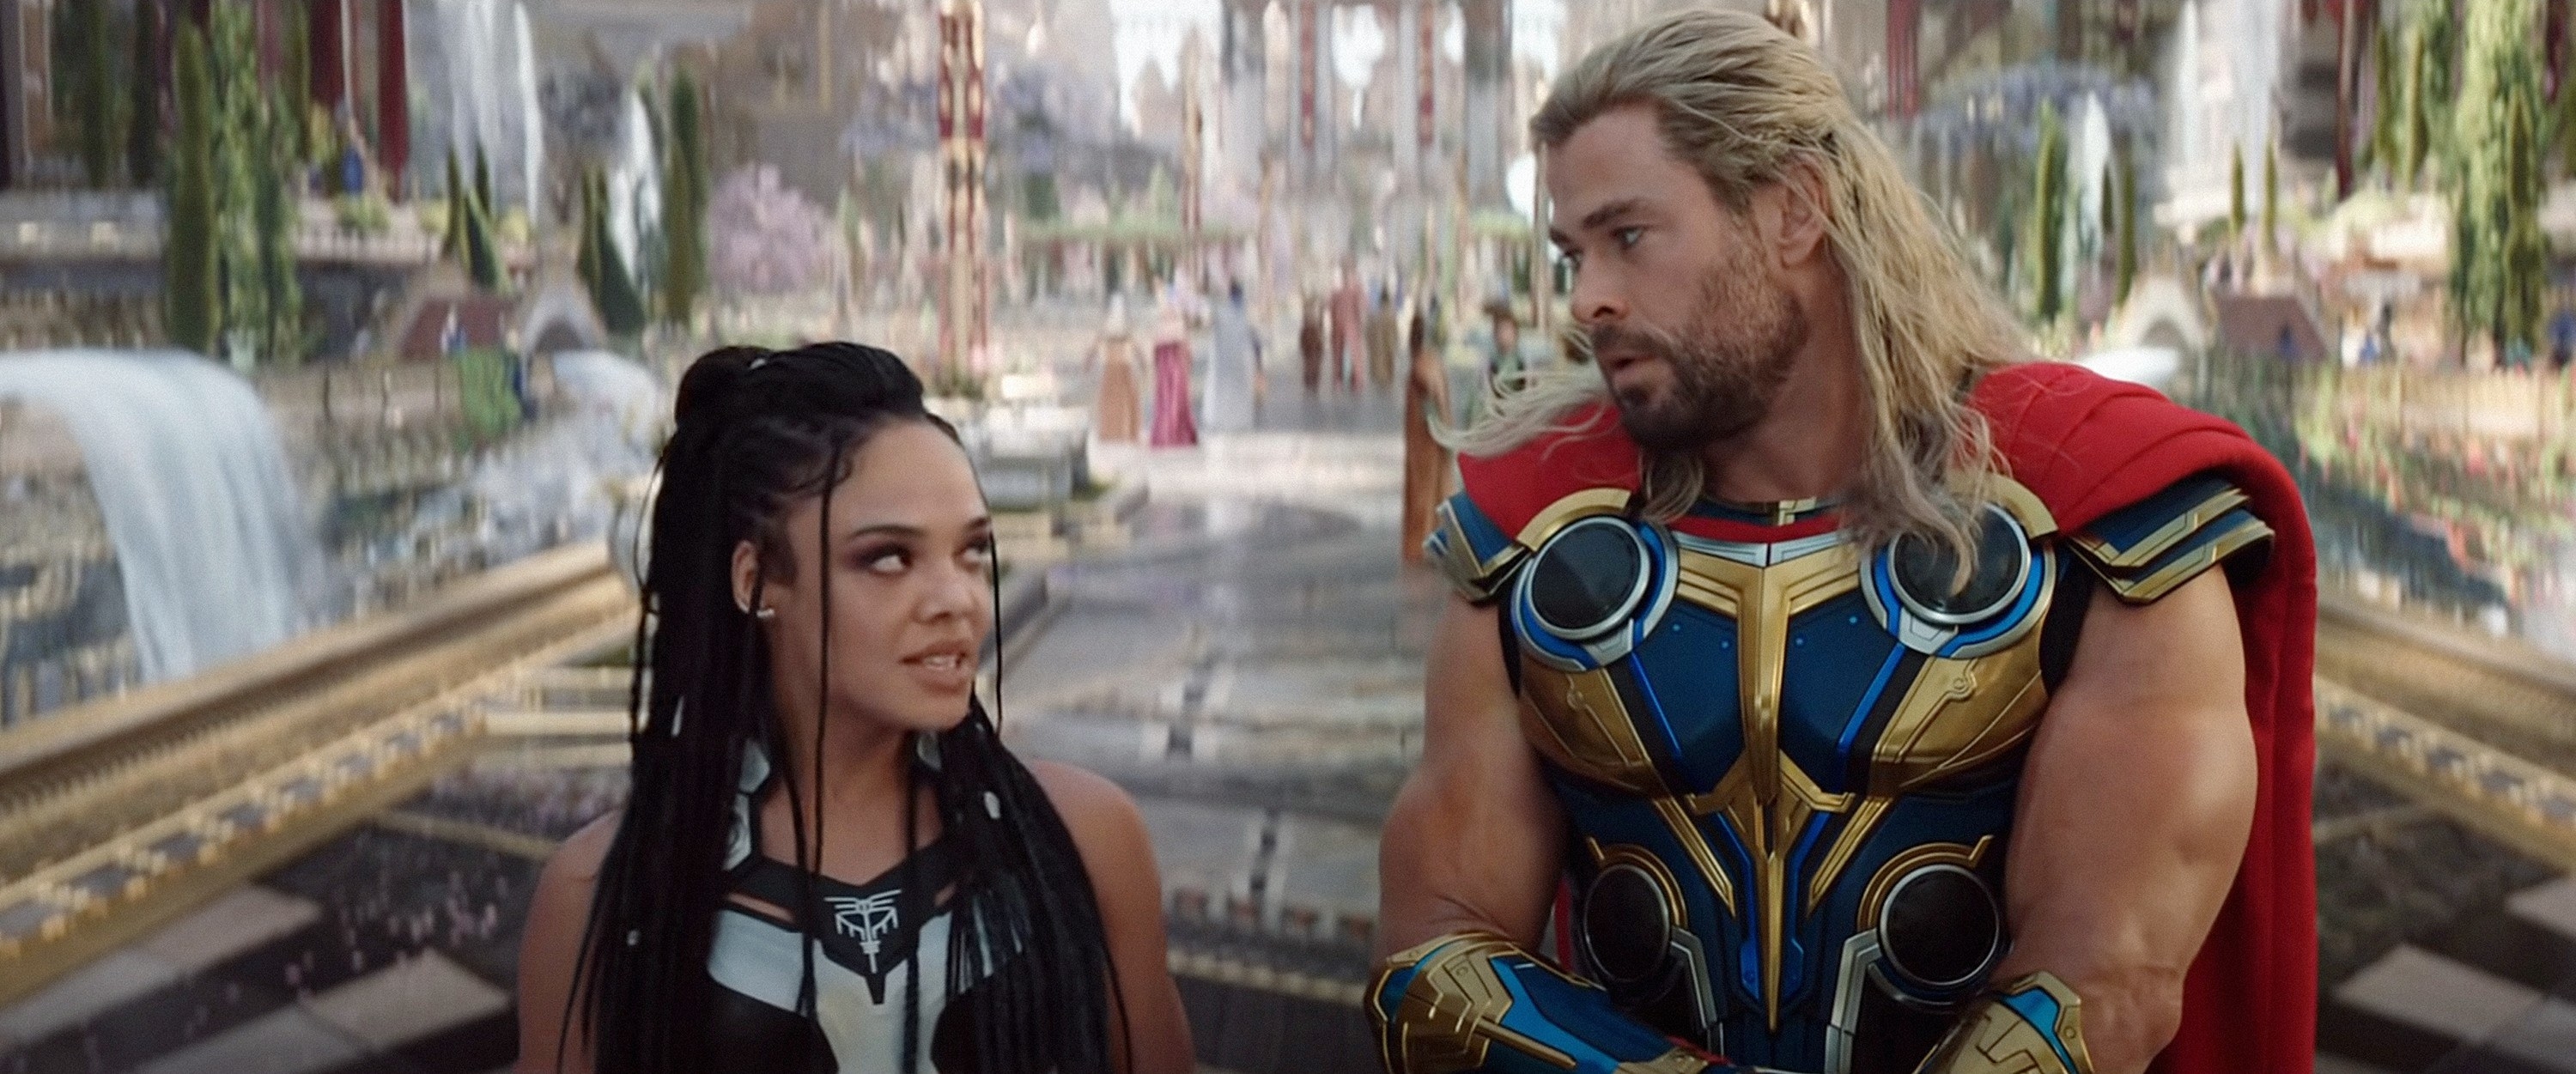 Tessa standing next to Chris Hemsworth in a scene from Thor: Love and Thunder